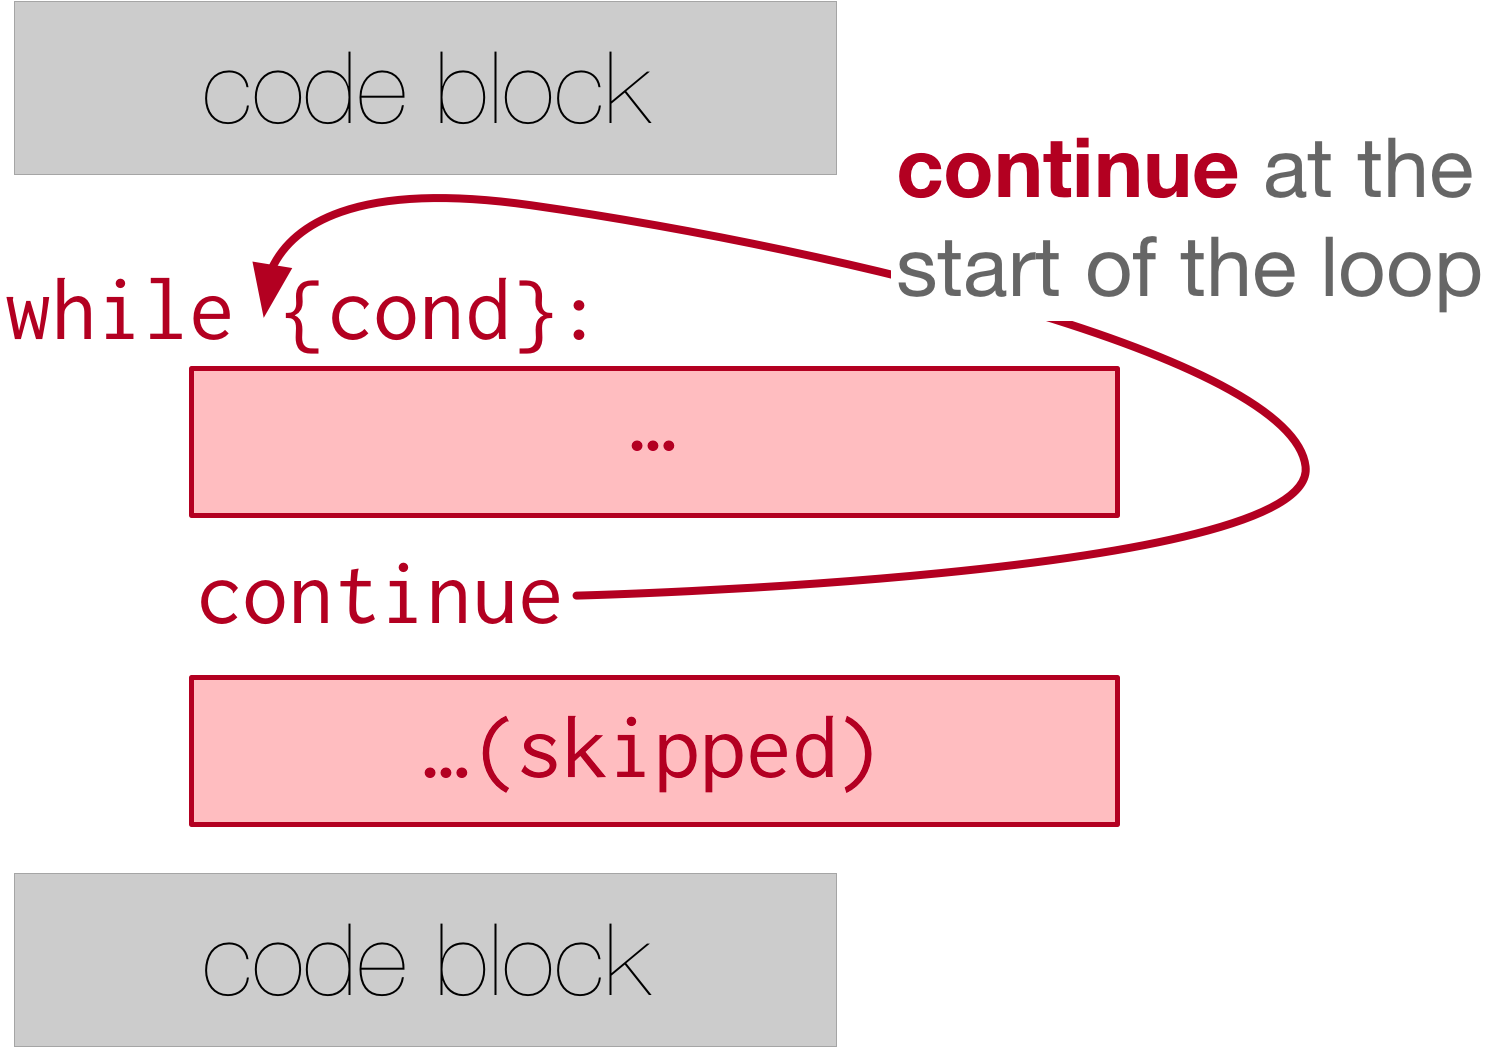 image showing a rectangle with "code block" written on it on top. Then, text that read "while {condition}": followed by an indented block with "..." written on it. continue is then written and another indented block is placed after the phrase continue, which has "... (skipped)" written on it. Finally, an unindented block belonging to code outside the while loop is at the bottom. It says "code block". An arrow points from the word continue to the while conditional statement at the top of the while loop. The phrase "continue at the start of the loop" is written.